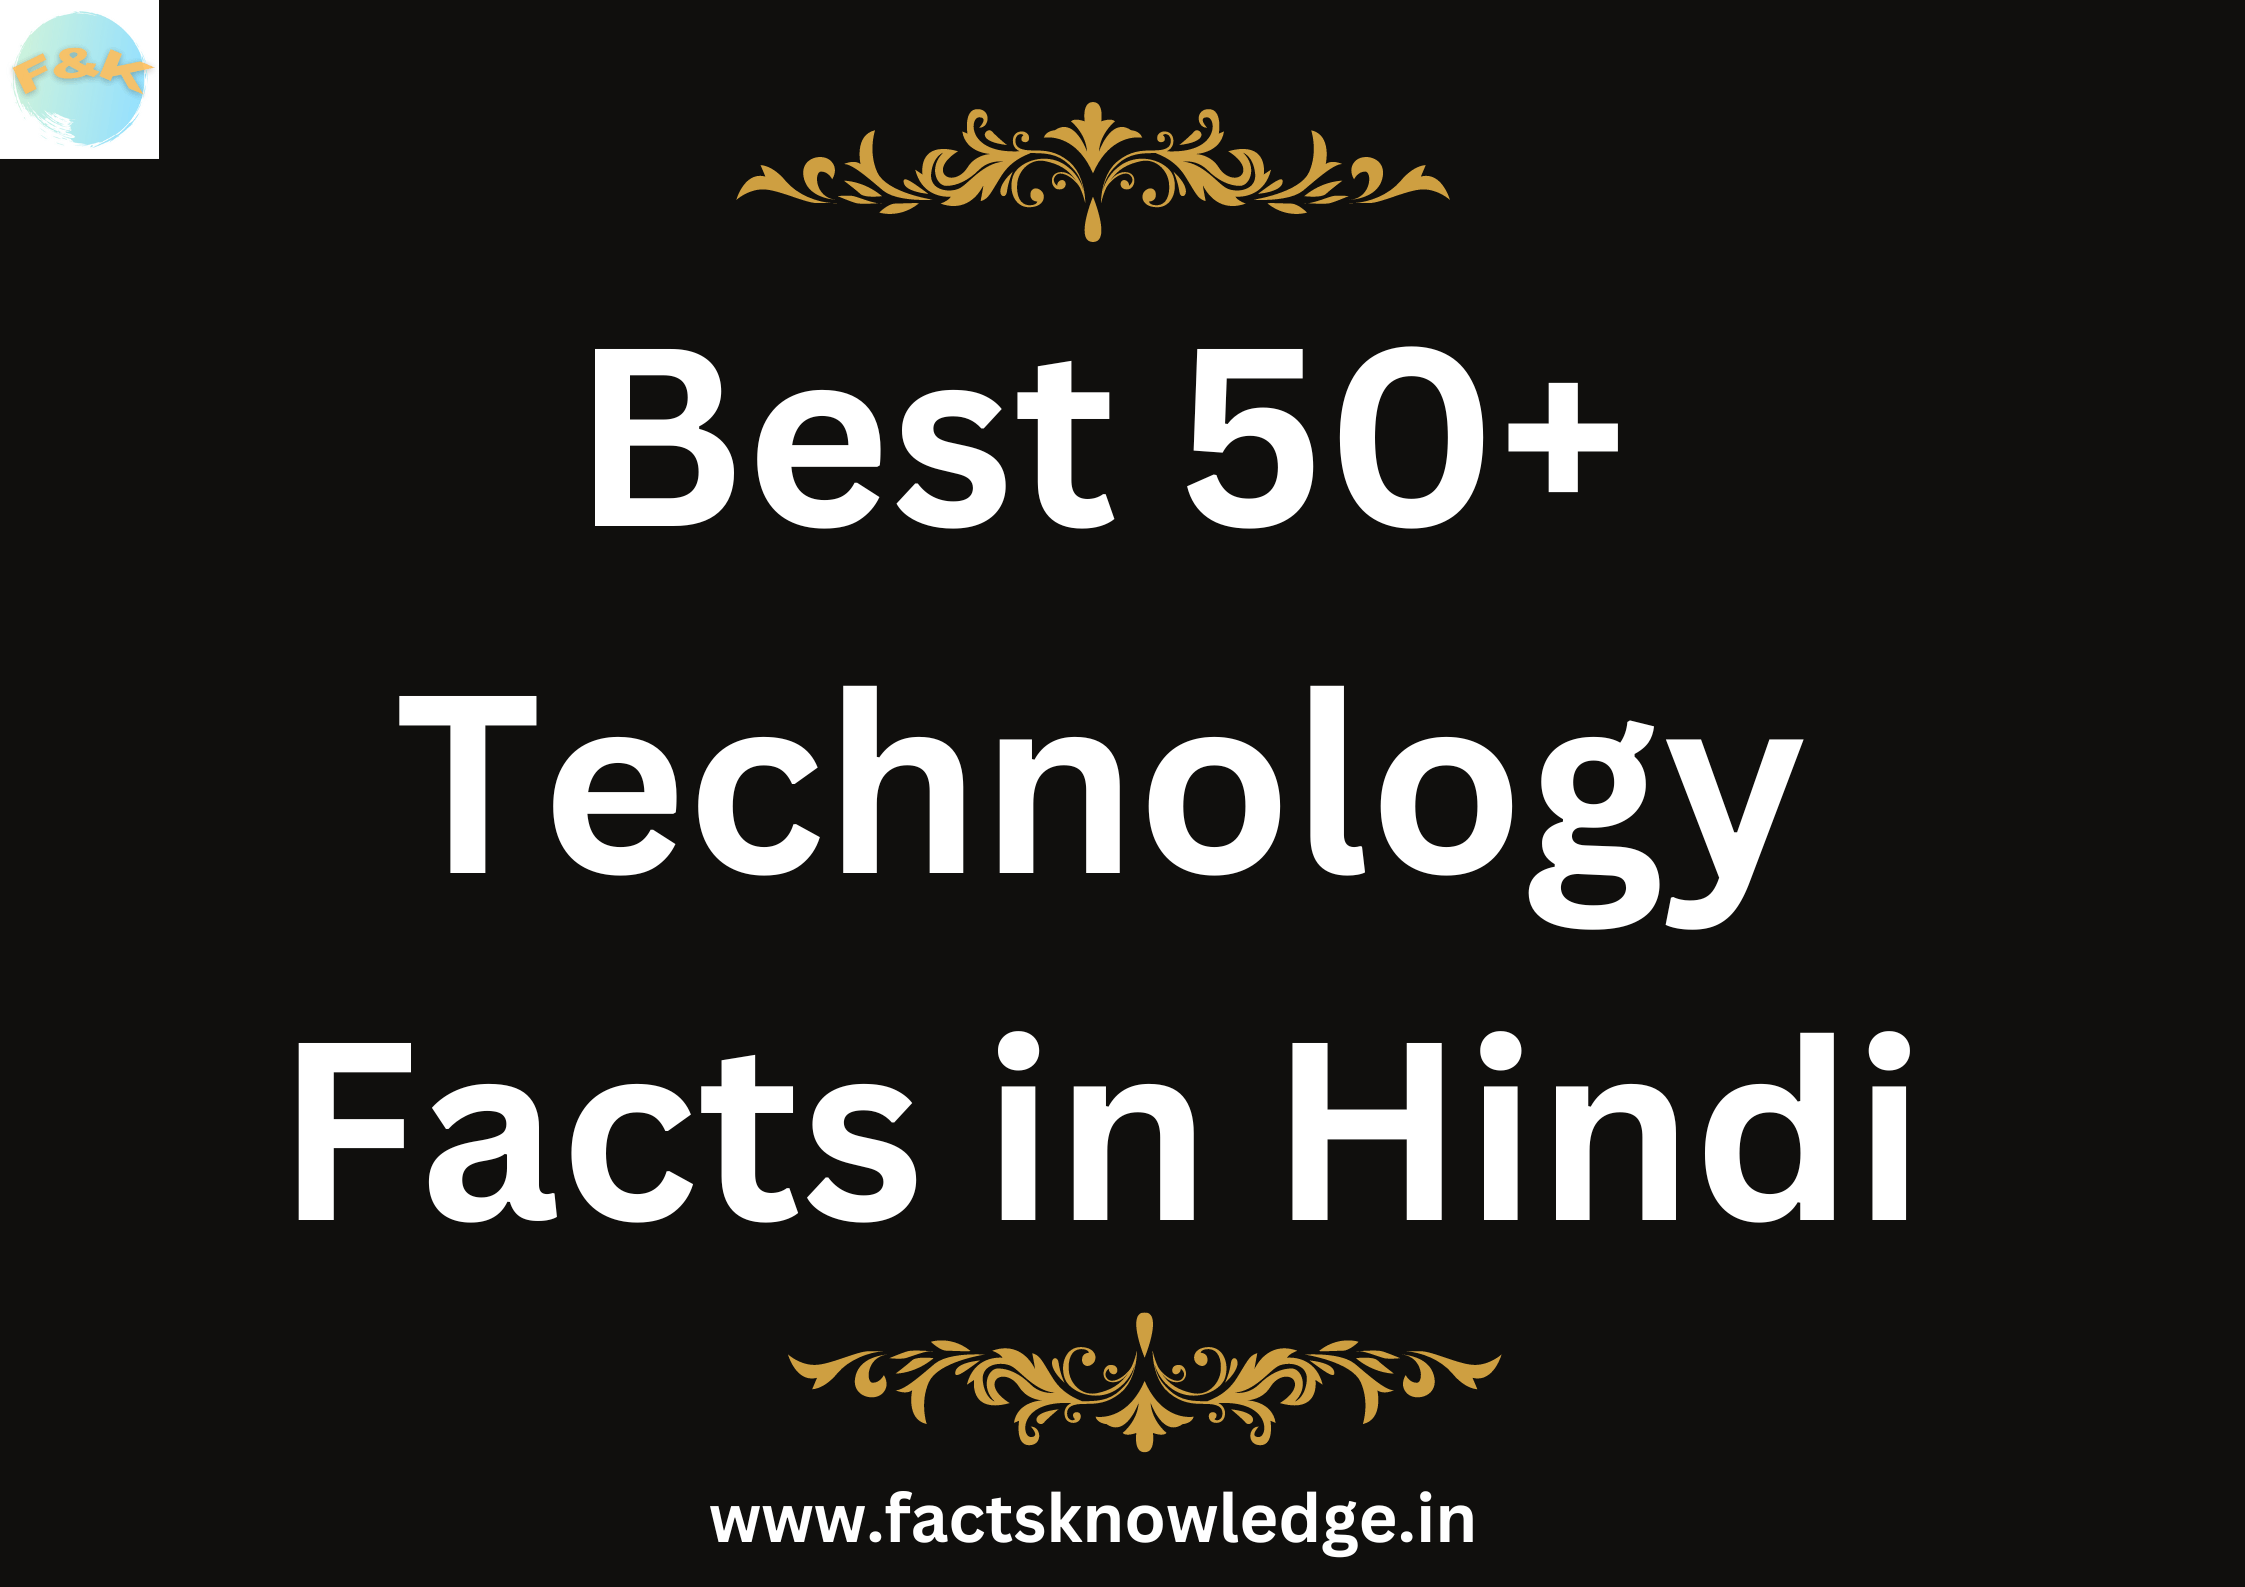 Best 50+ Technology Facts in Hindi | Hindi Facts | Facts in Hindi | Amazing facts in Hindi | interesting facts in hindi | tech facts in hindi